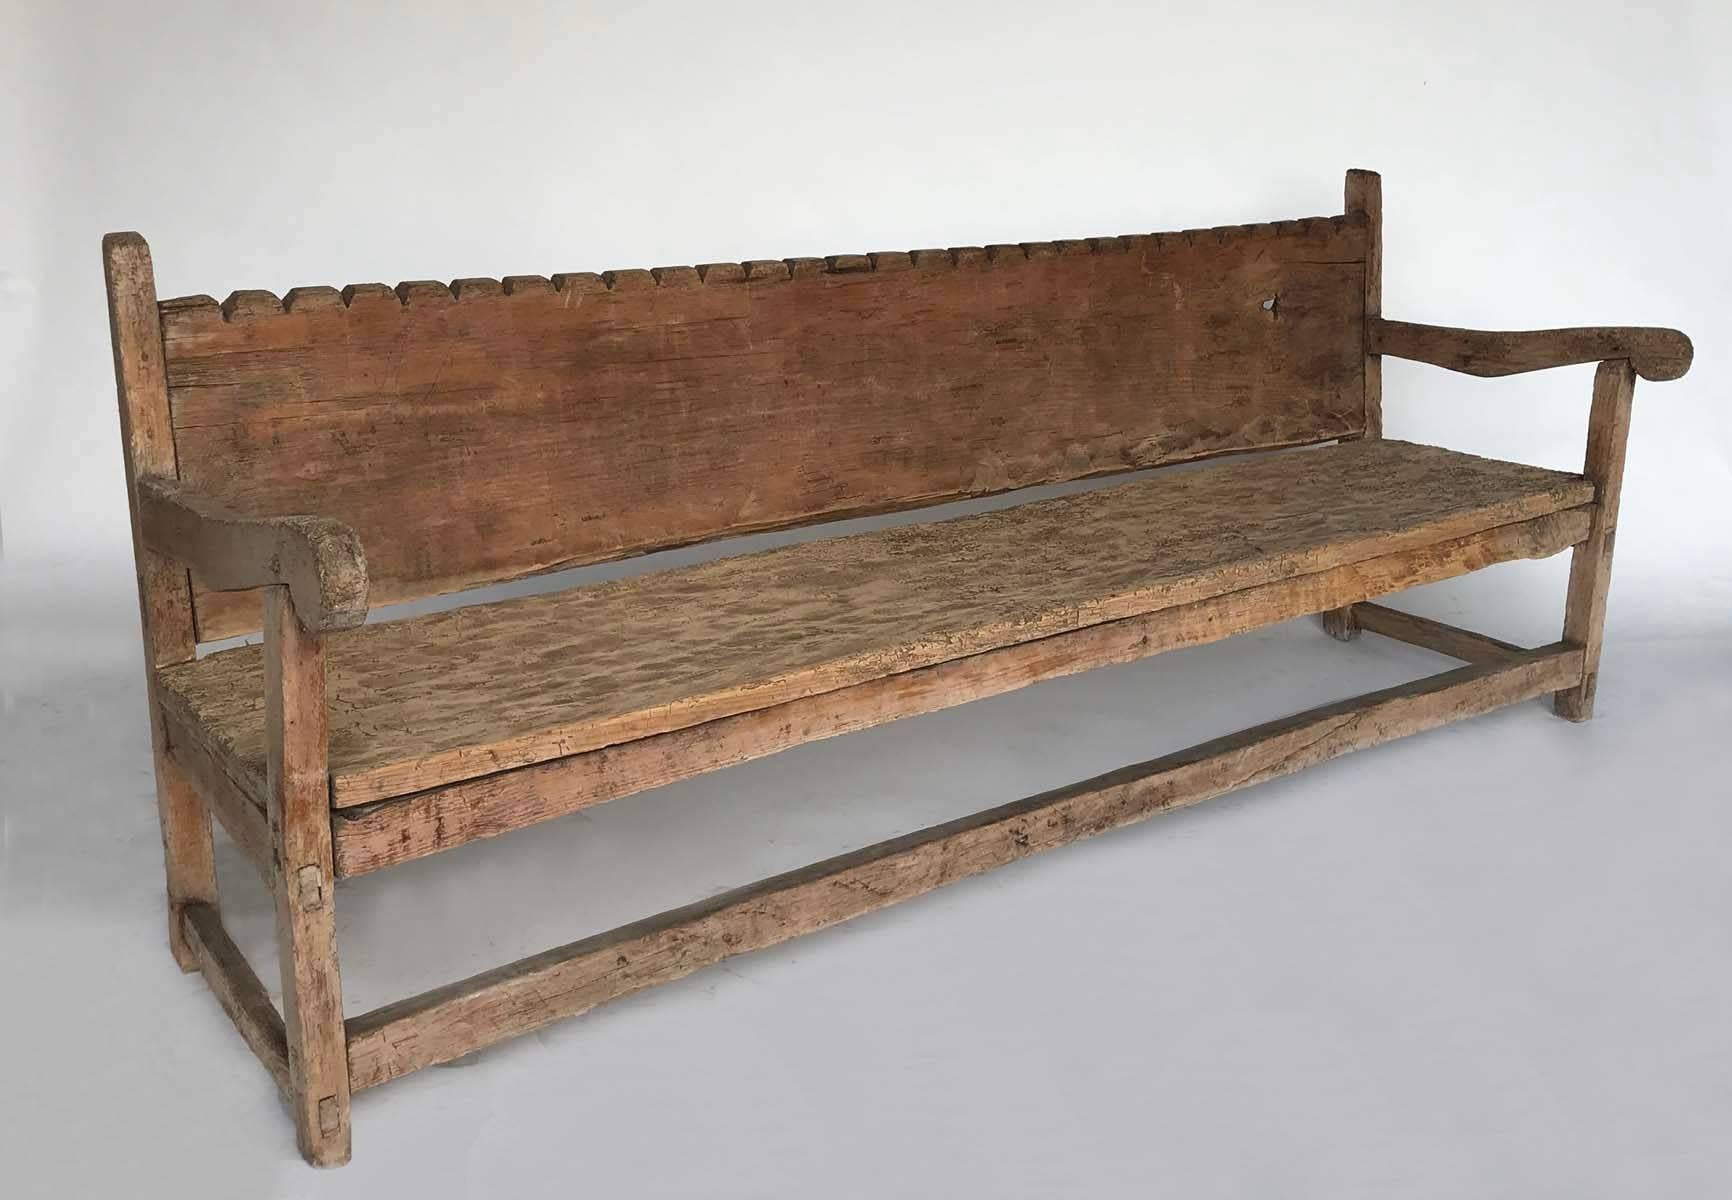 Great old Guatemalan Chajul bench with scalloped backrest. Seat and back are made of one large wide Cypress plank each. Has had a long life outside and it is worn, sun bleached and naturally showing signs of age and wear. It has a natural beauty and